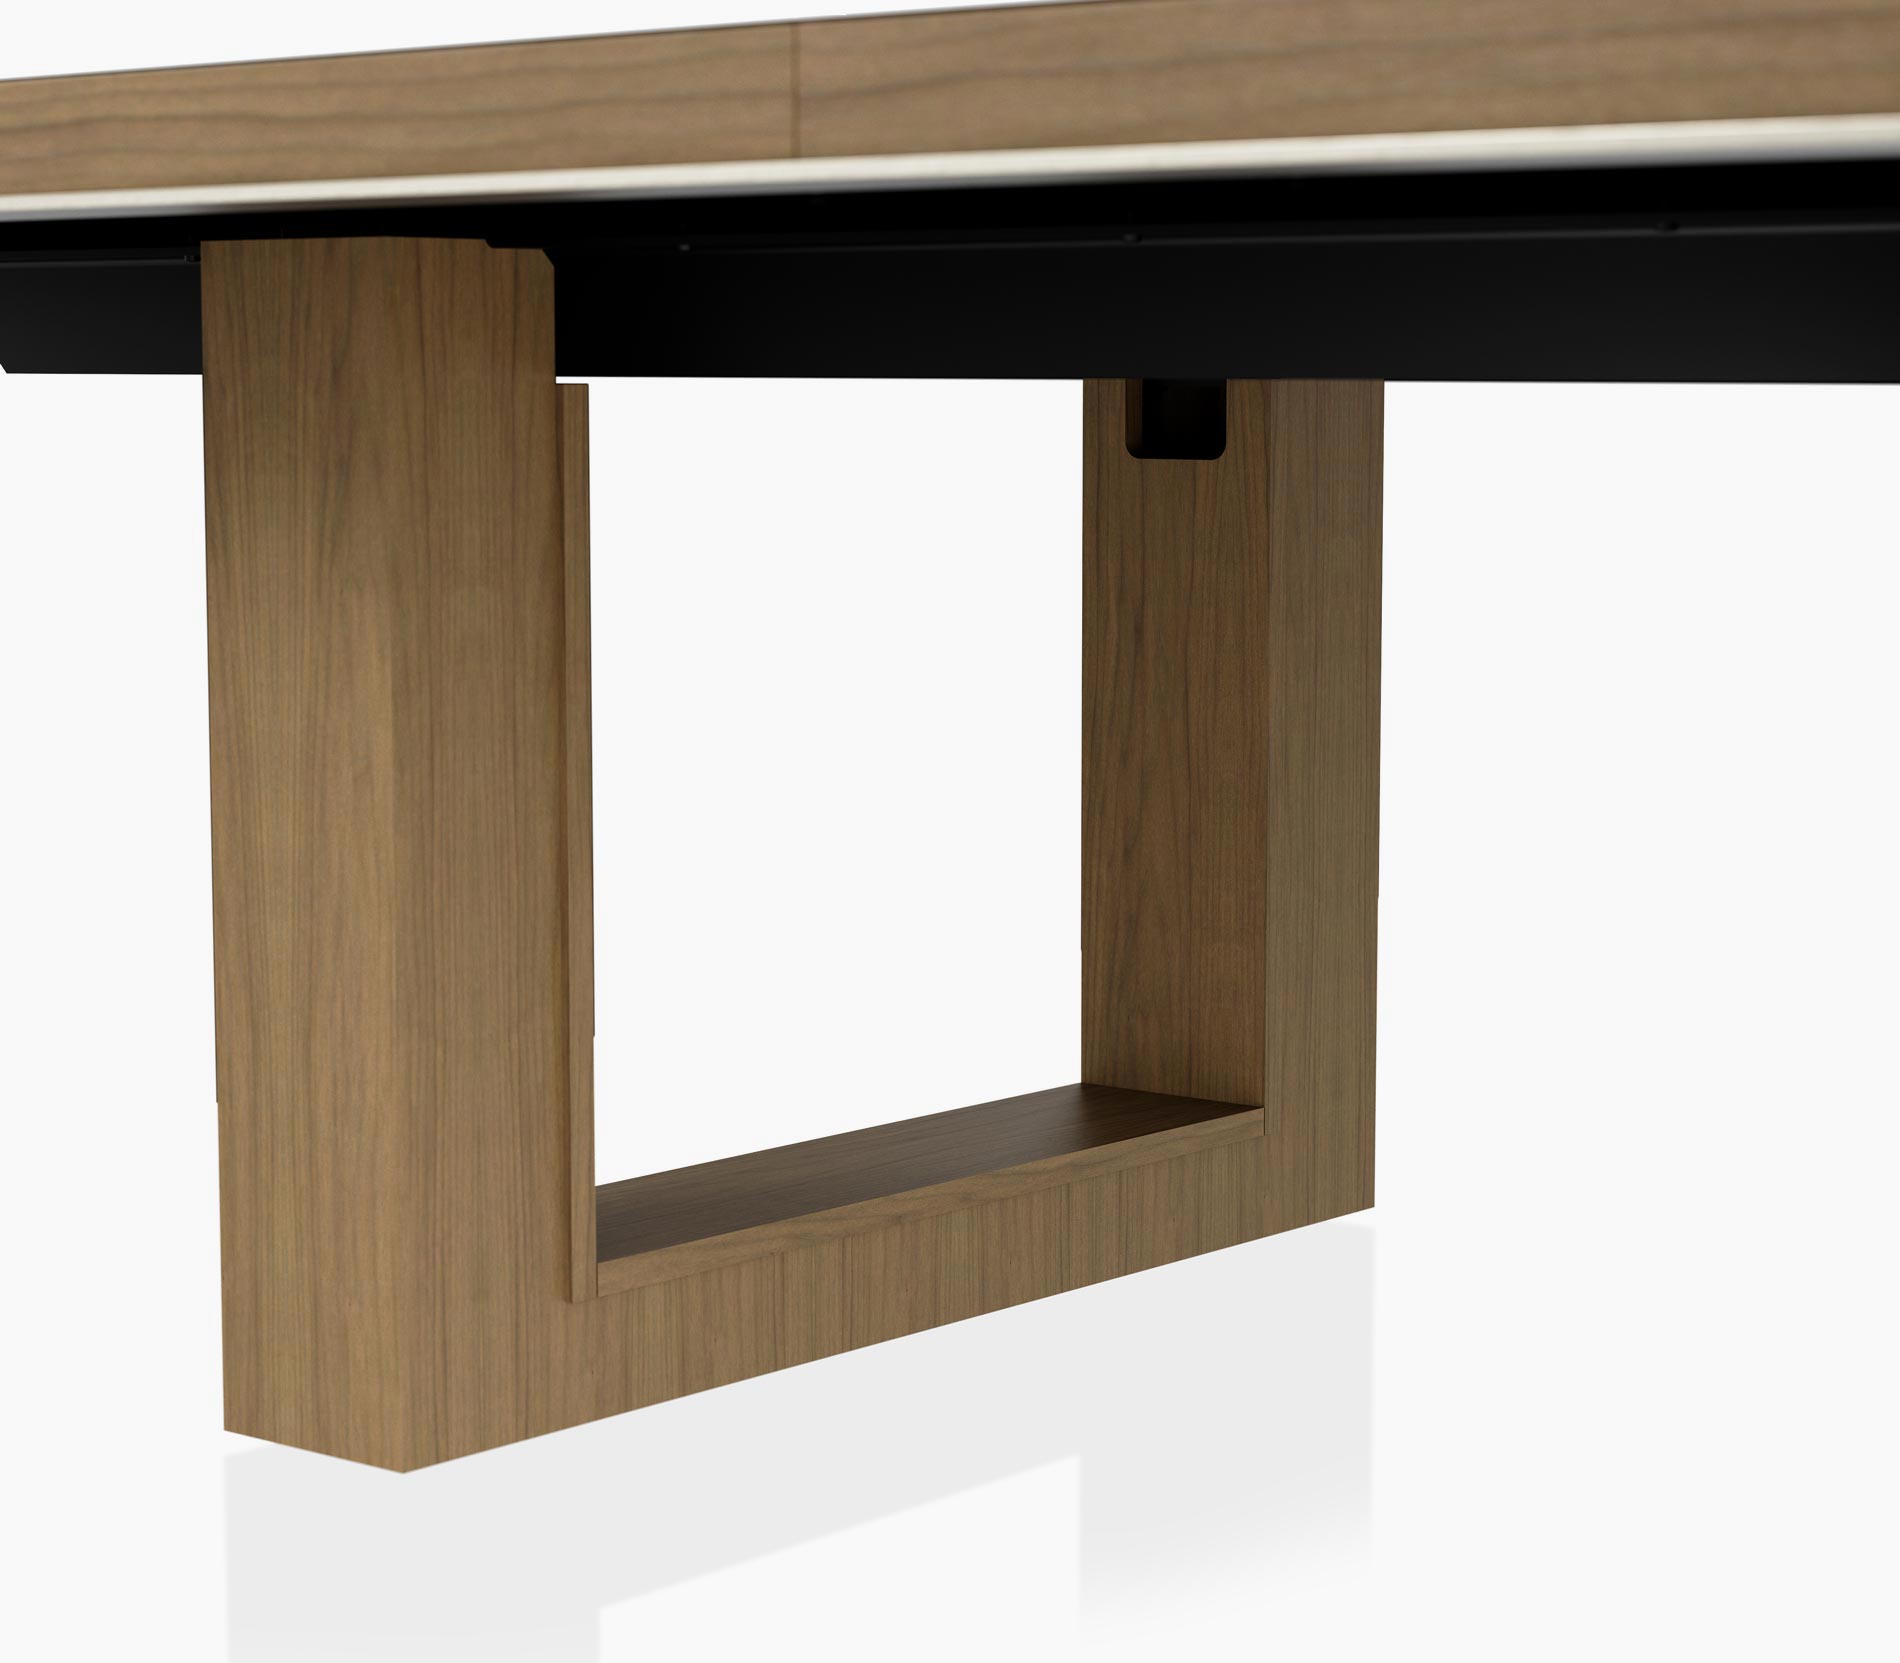 Base detail of a Highline Fifty Conference Table in natural flat cut walnut with a satin nickel edge